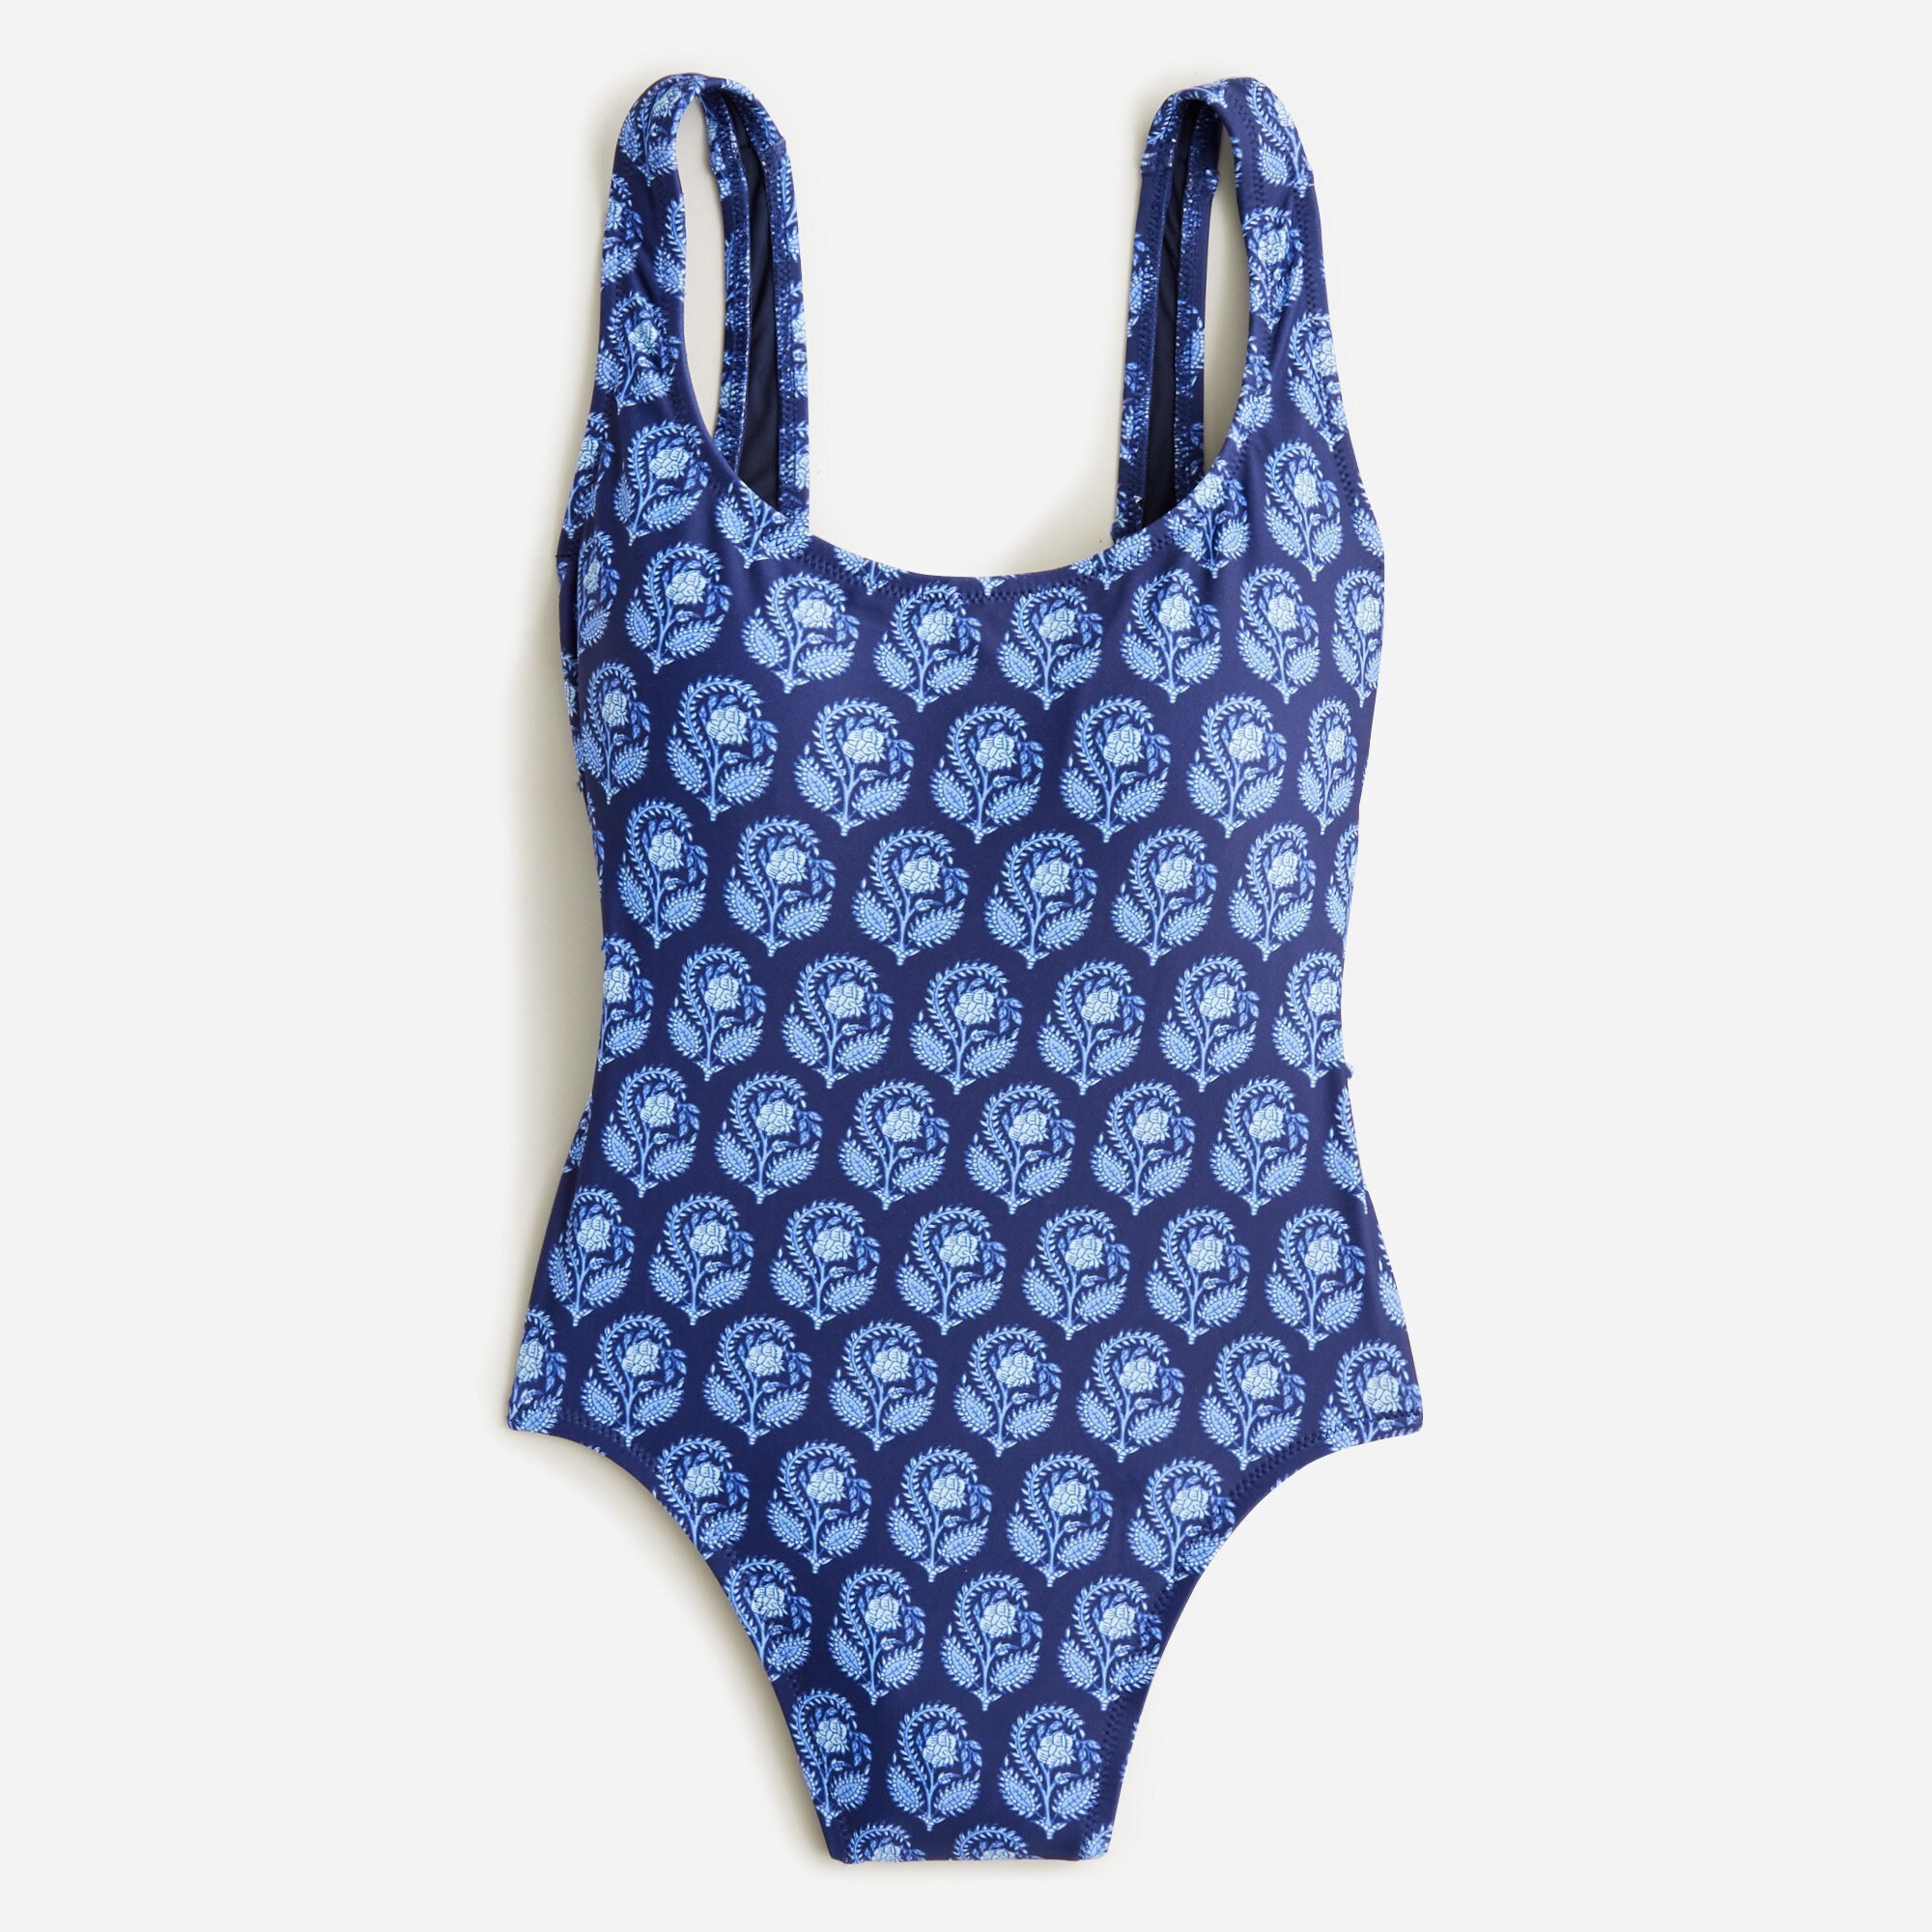  1989 scoopback one-piece swimsuit in navy bouquet block print